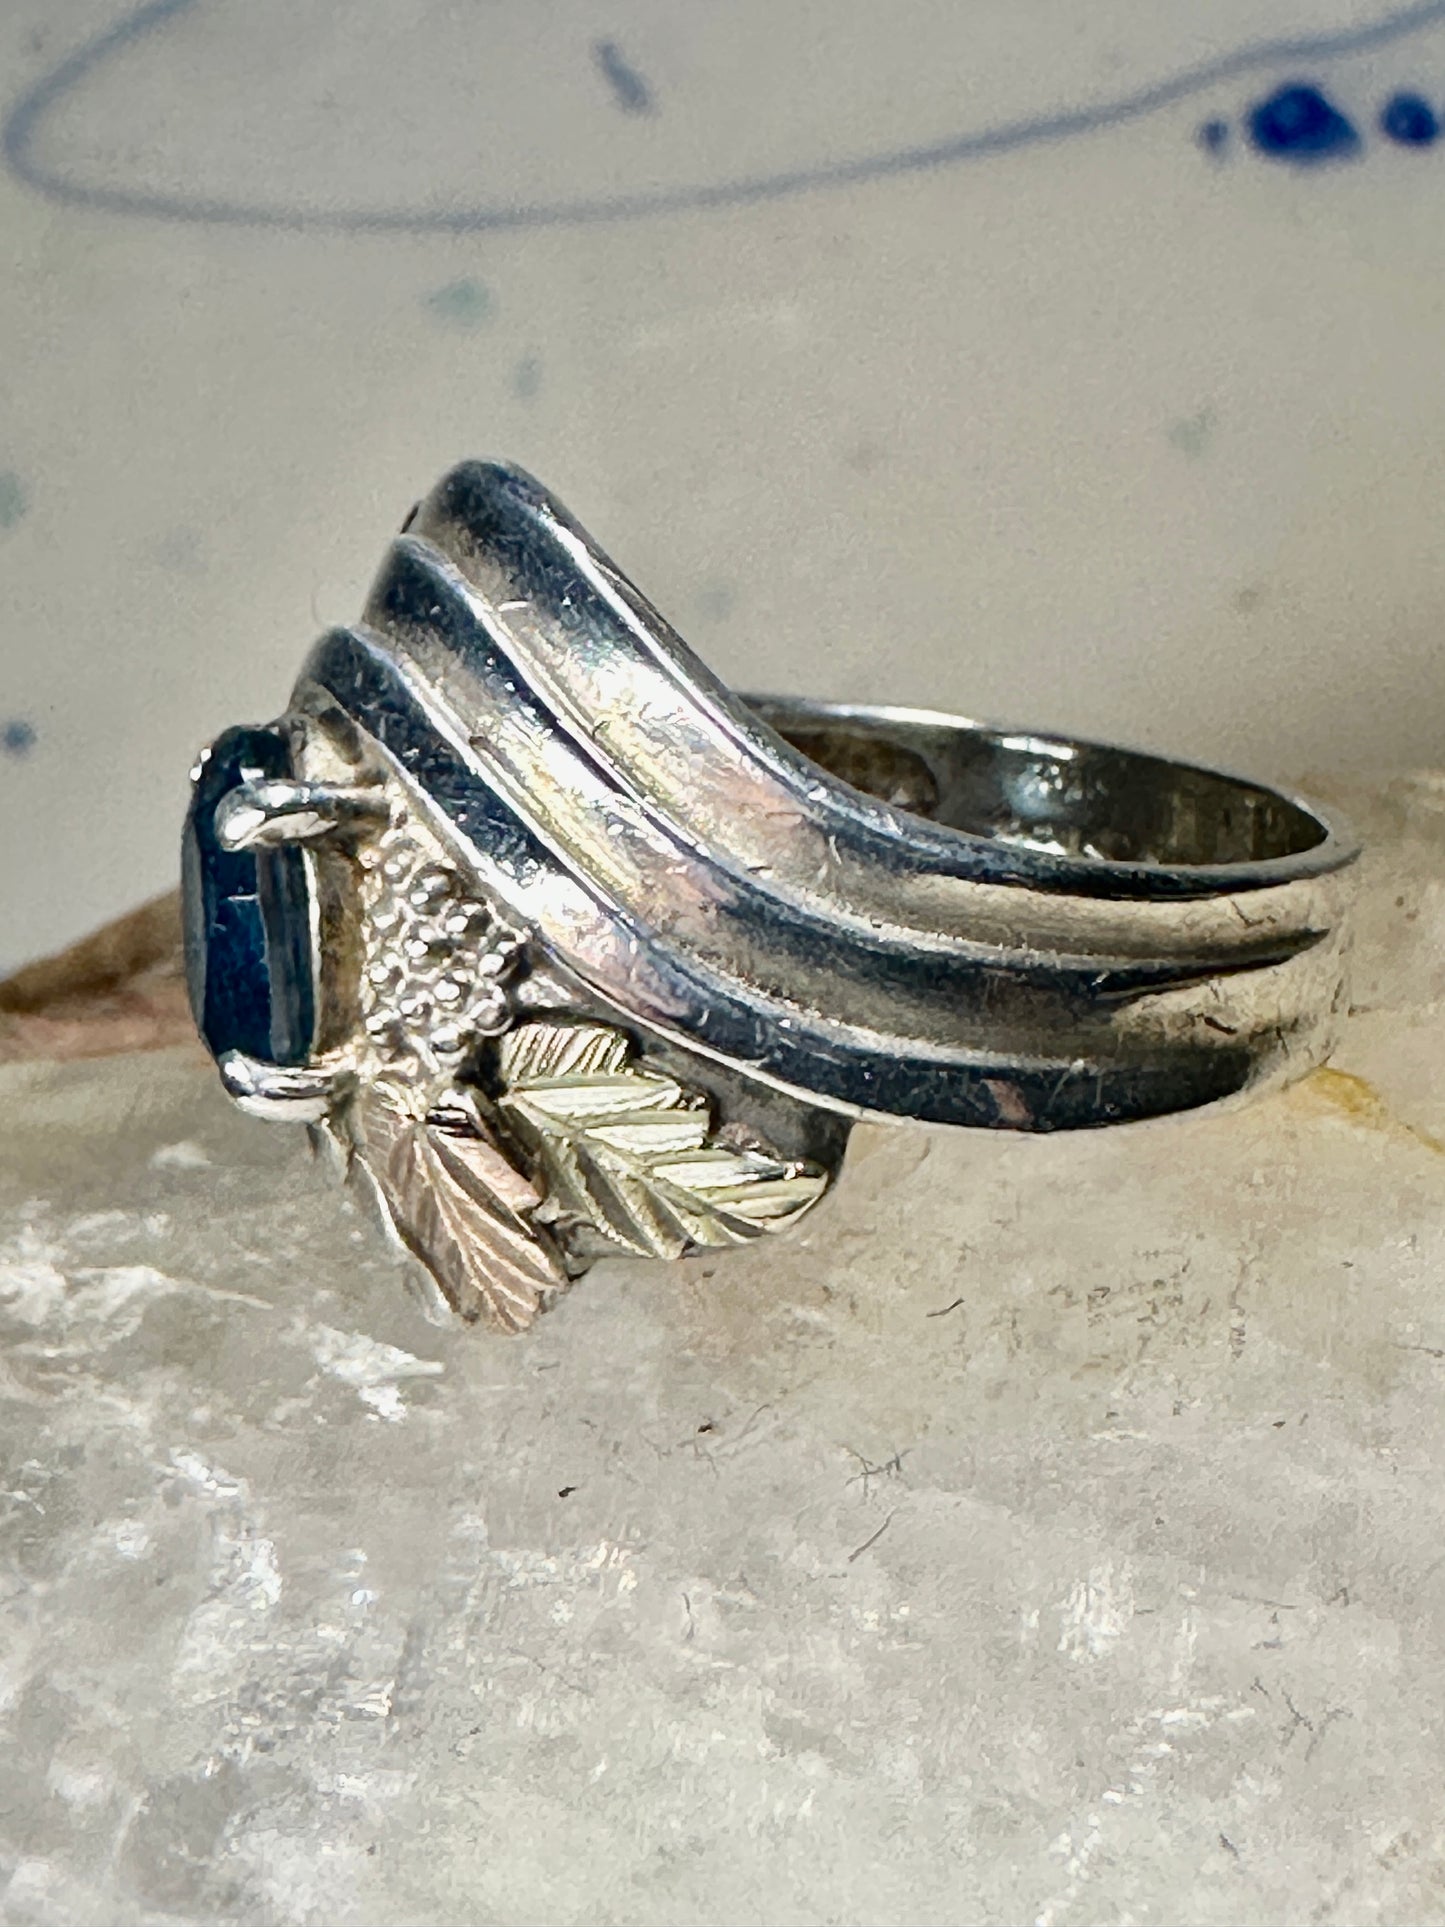 Black Hills Gold ring size 6.75 blue band sterling silver band women